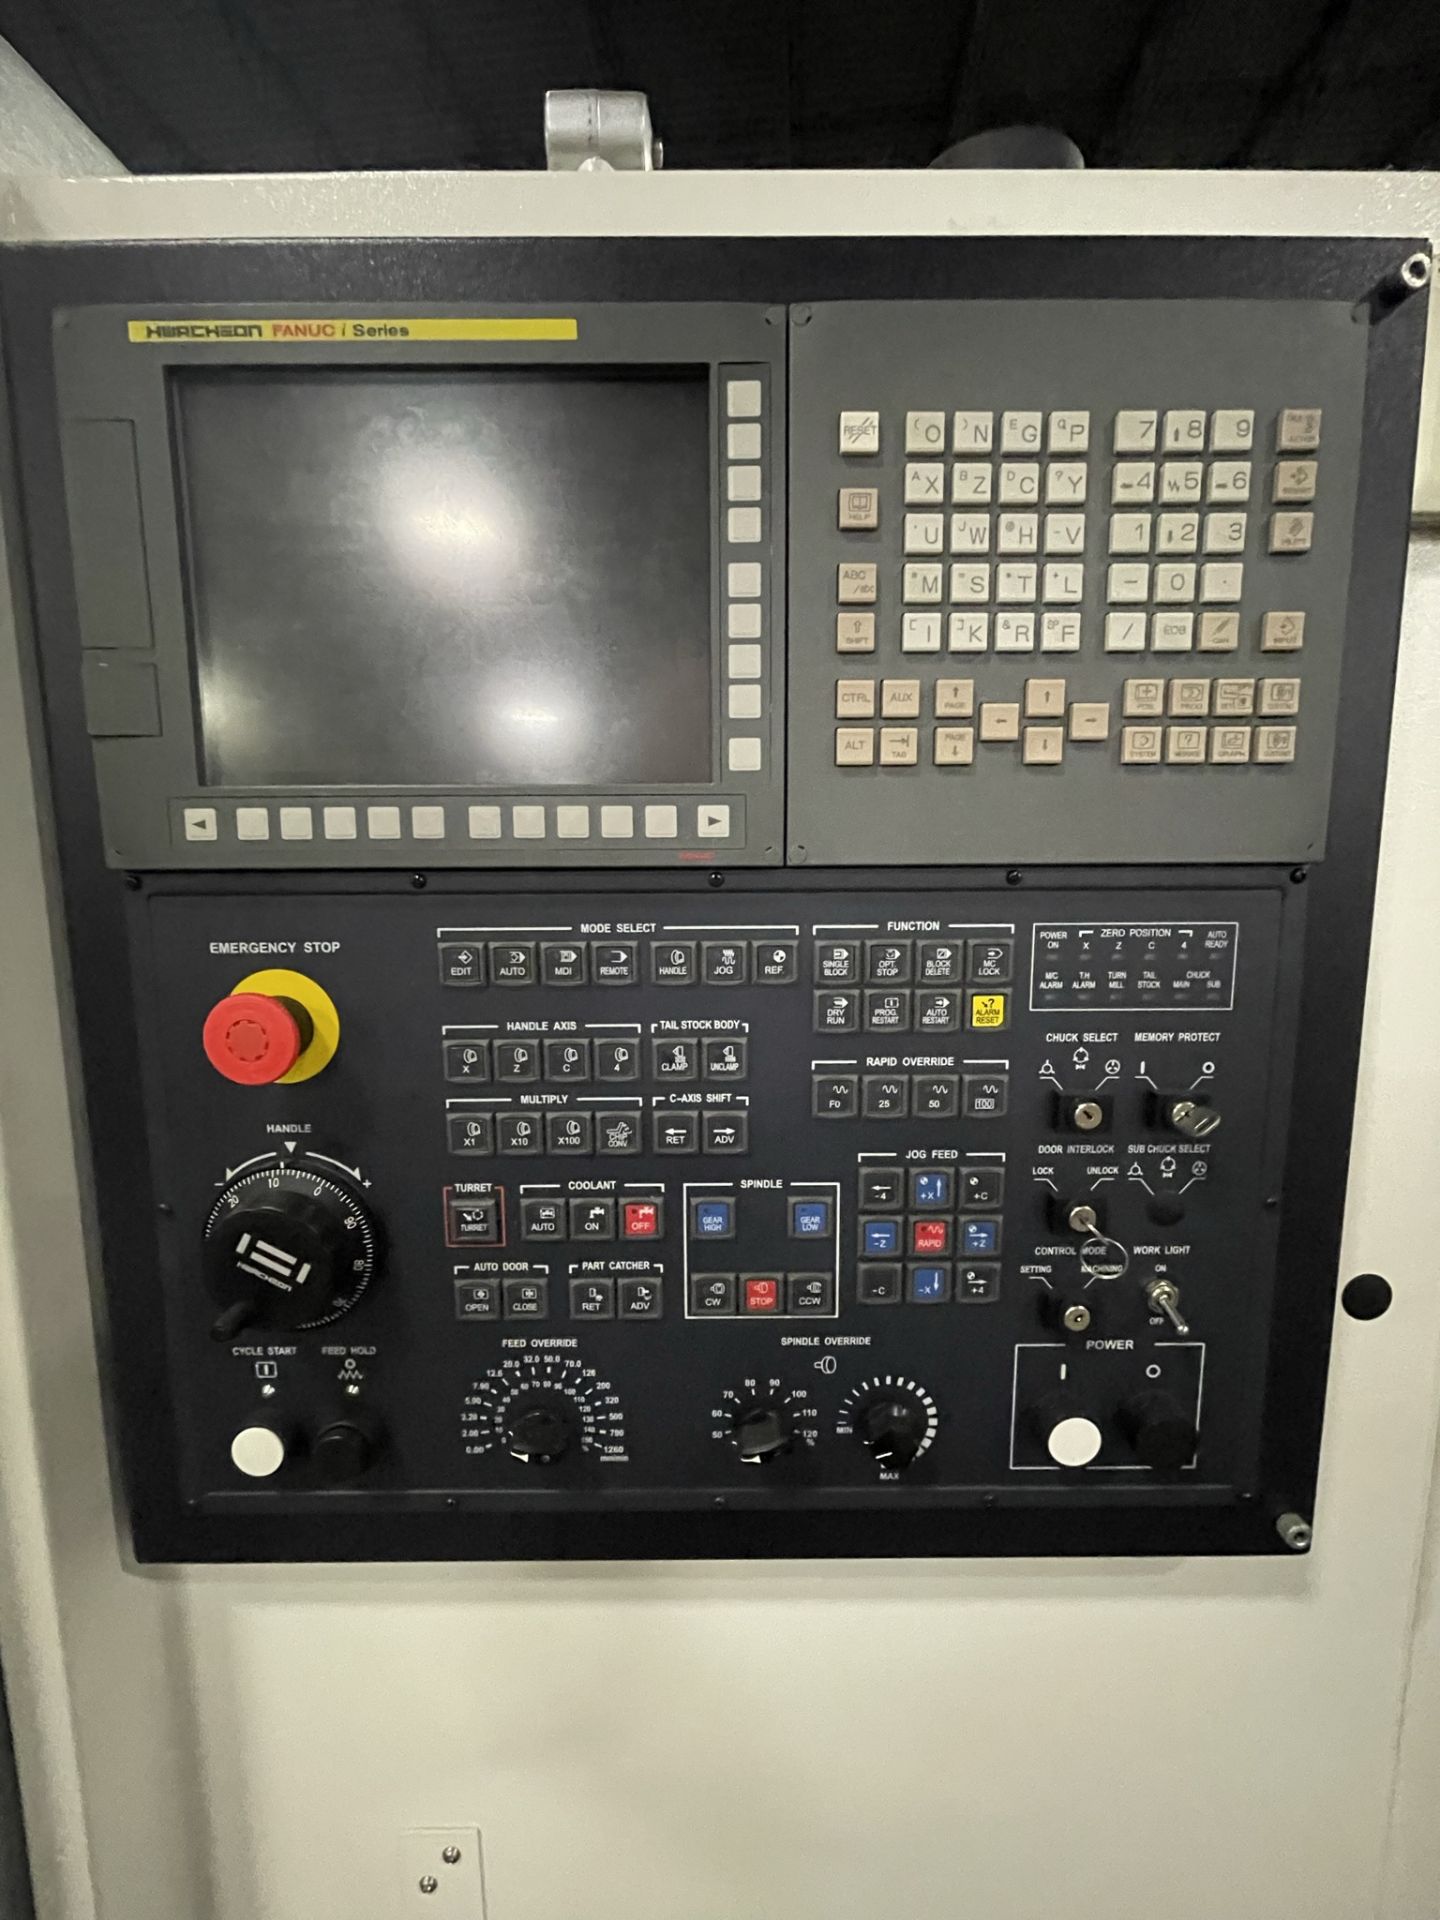 2018 Hwacheon Model Cutex 160B CNC Lathe, Fanuc I Ser. Cont., Live Tooling Swing Over Bed: 21.65” - Image 2 of 9